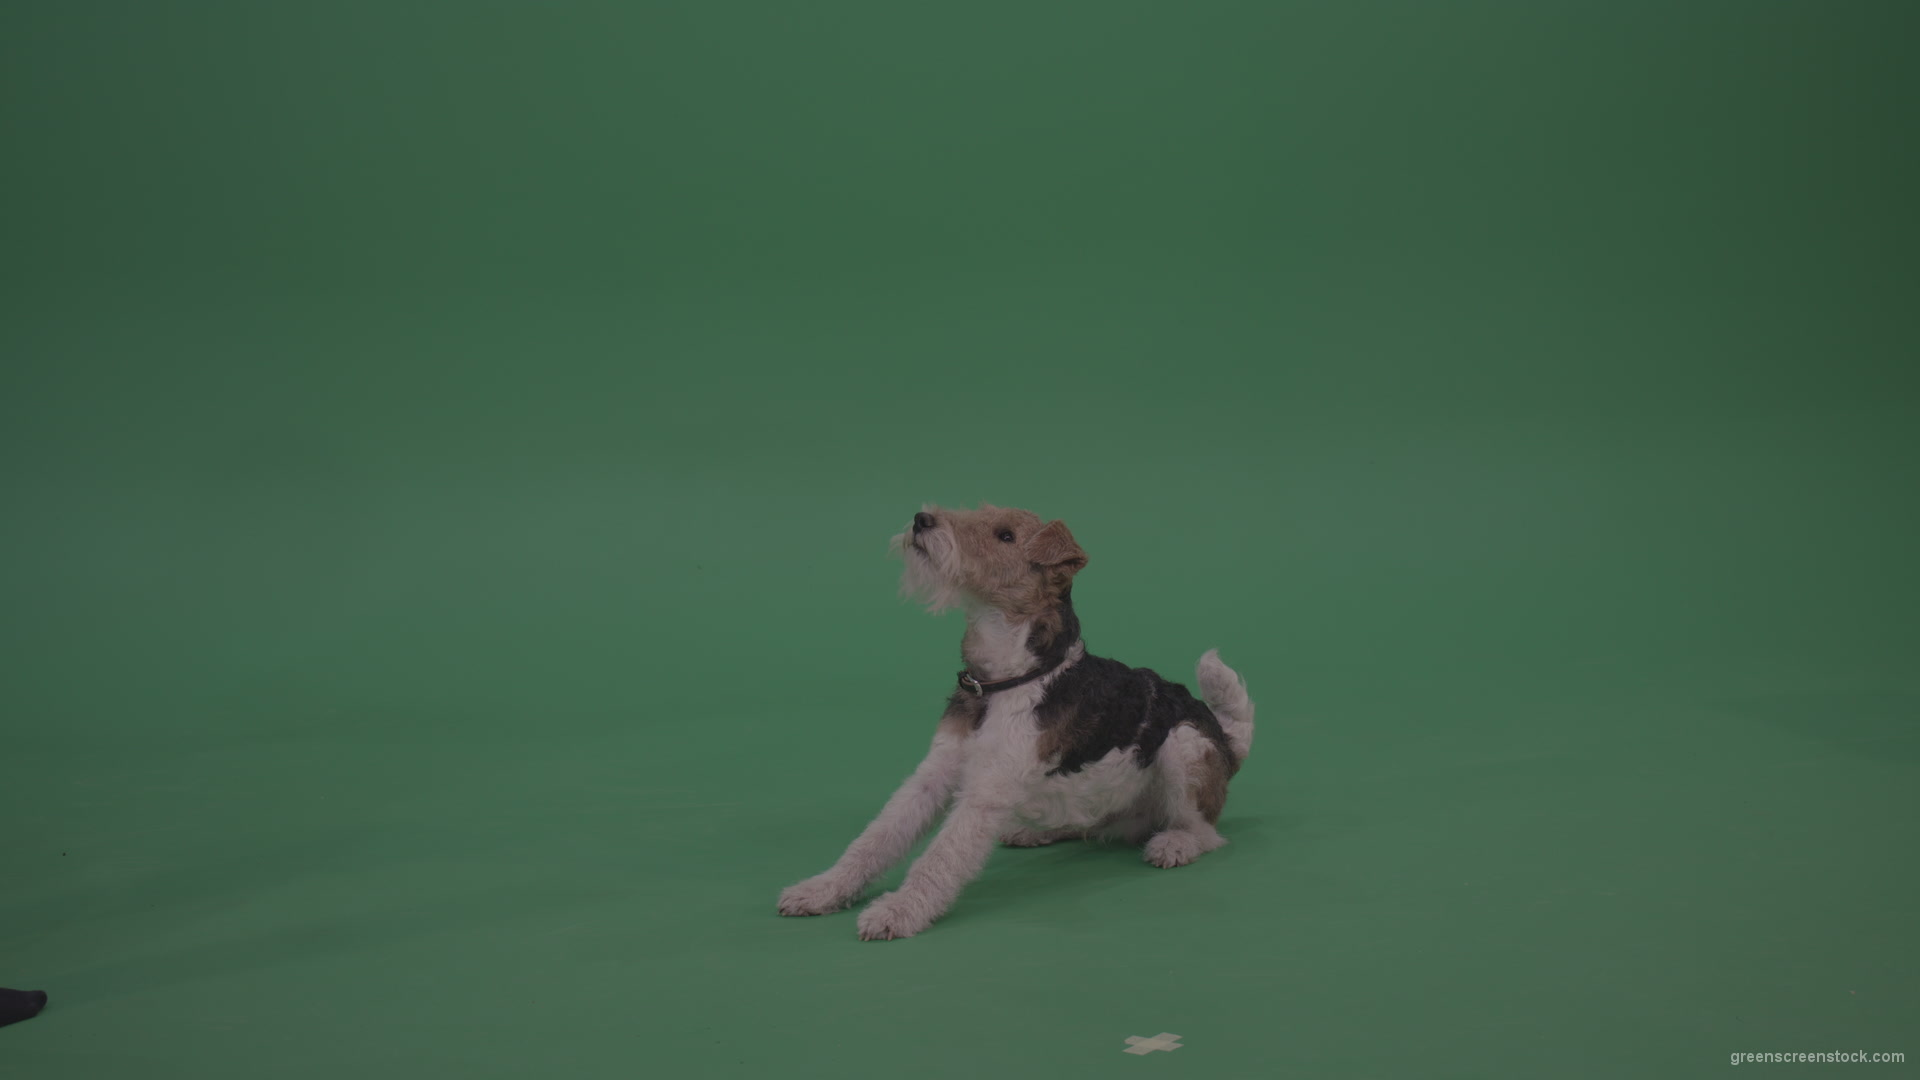 Wire-Fox-Terrier-Standing-On-Back-Feet-Ann-Serving-Then-Lies-Down-On-The-Ground-On-Green-Screen-Wall-Background_007 Green Screen Stock